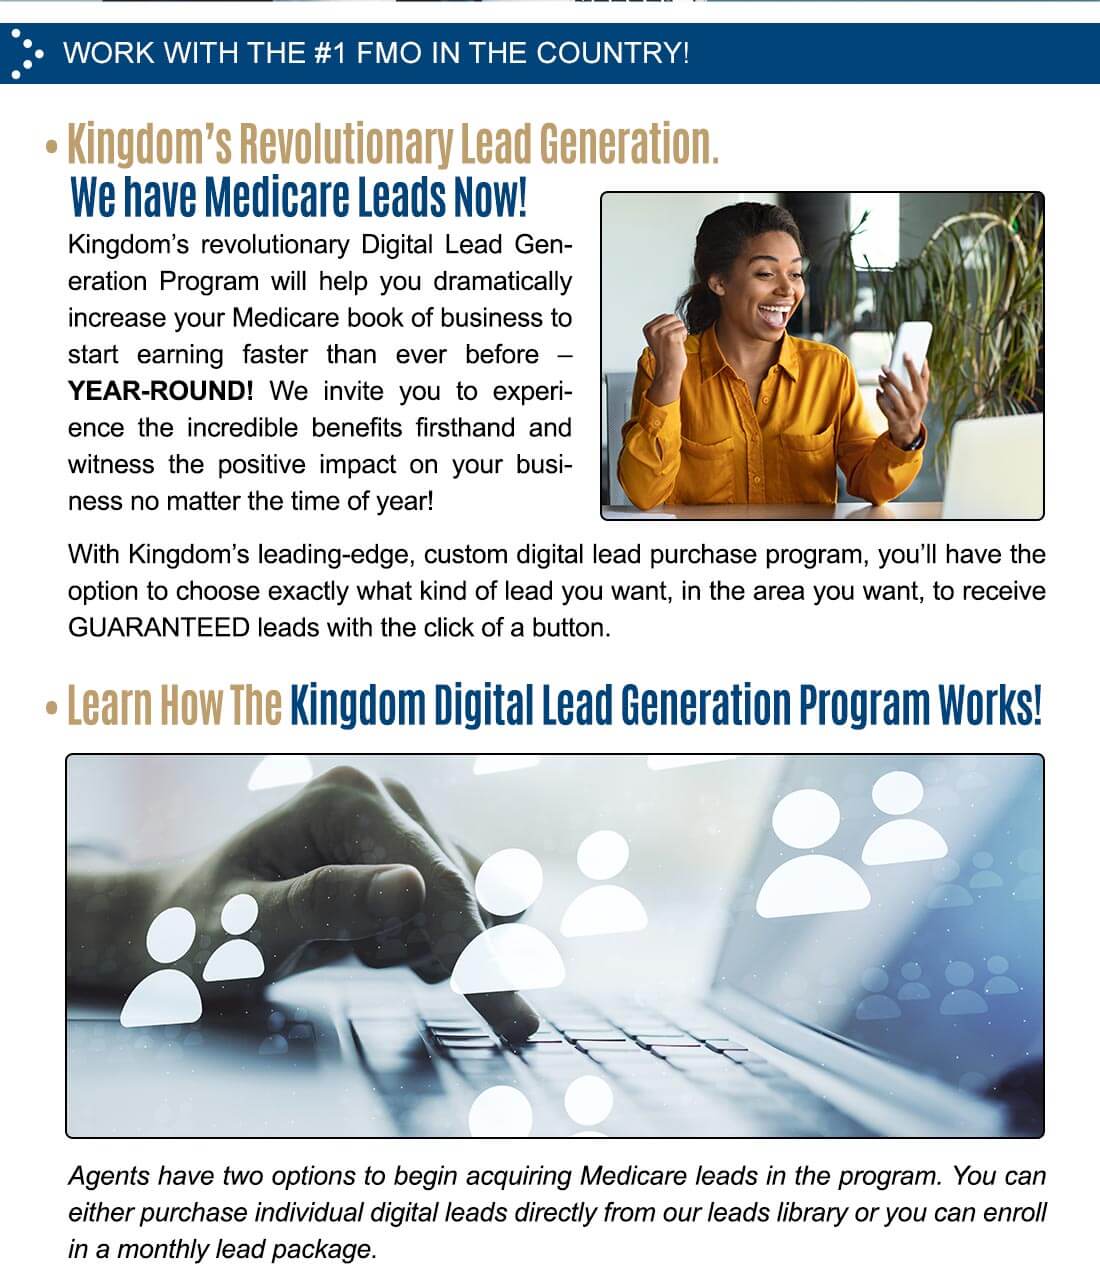 WORK WITH THE #1 FMO IN THE COUNTRY! â€¢ Kingdom's Revolutionary Lead Generation. We have Medicare Leads Now! Kingdom's revolutionary Digital Lead Generation Program will help you dramatically increase your Medicare book of business to start earning faster than ever before â€” YEAR-ROUND! We invite you to experience the incredible benefits firsthand and witness the positive impact on your business no matter the time of year! With Kingdom's leading-edge, custom digital lead purchase program, you'll have the option to choose exactly what kind of lead you want, in the area you want, to receive GUARANTEED leads with the click of a button. â€¢ Learn How The Kingdom Digital lead Generation Program Works! Agents have two options to begin acquiring Medicare leads in the program. You can either purchase individual digital leads directly from our leads library or you can enroll in a monthly lead package.